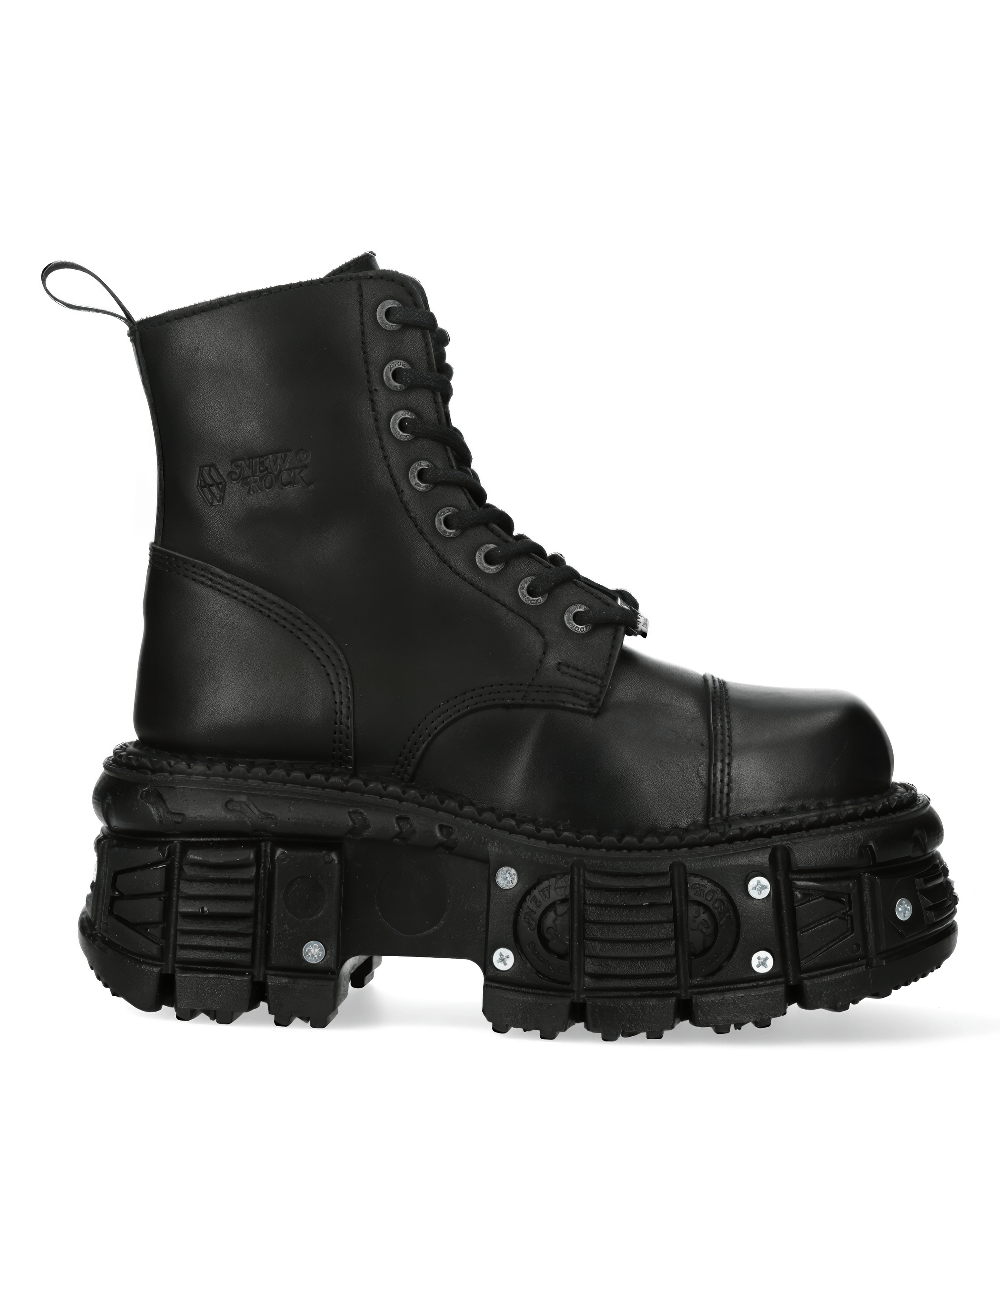 NEW ROCK Rugged Punk Style Ankle Boot with Stud Details